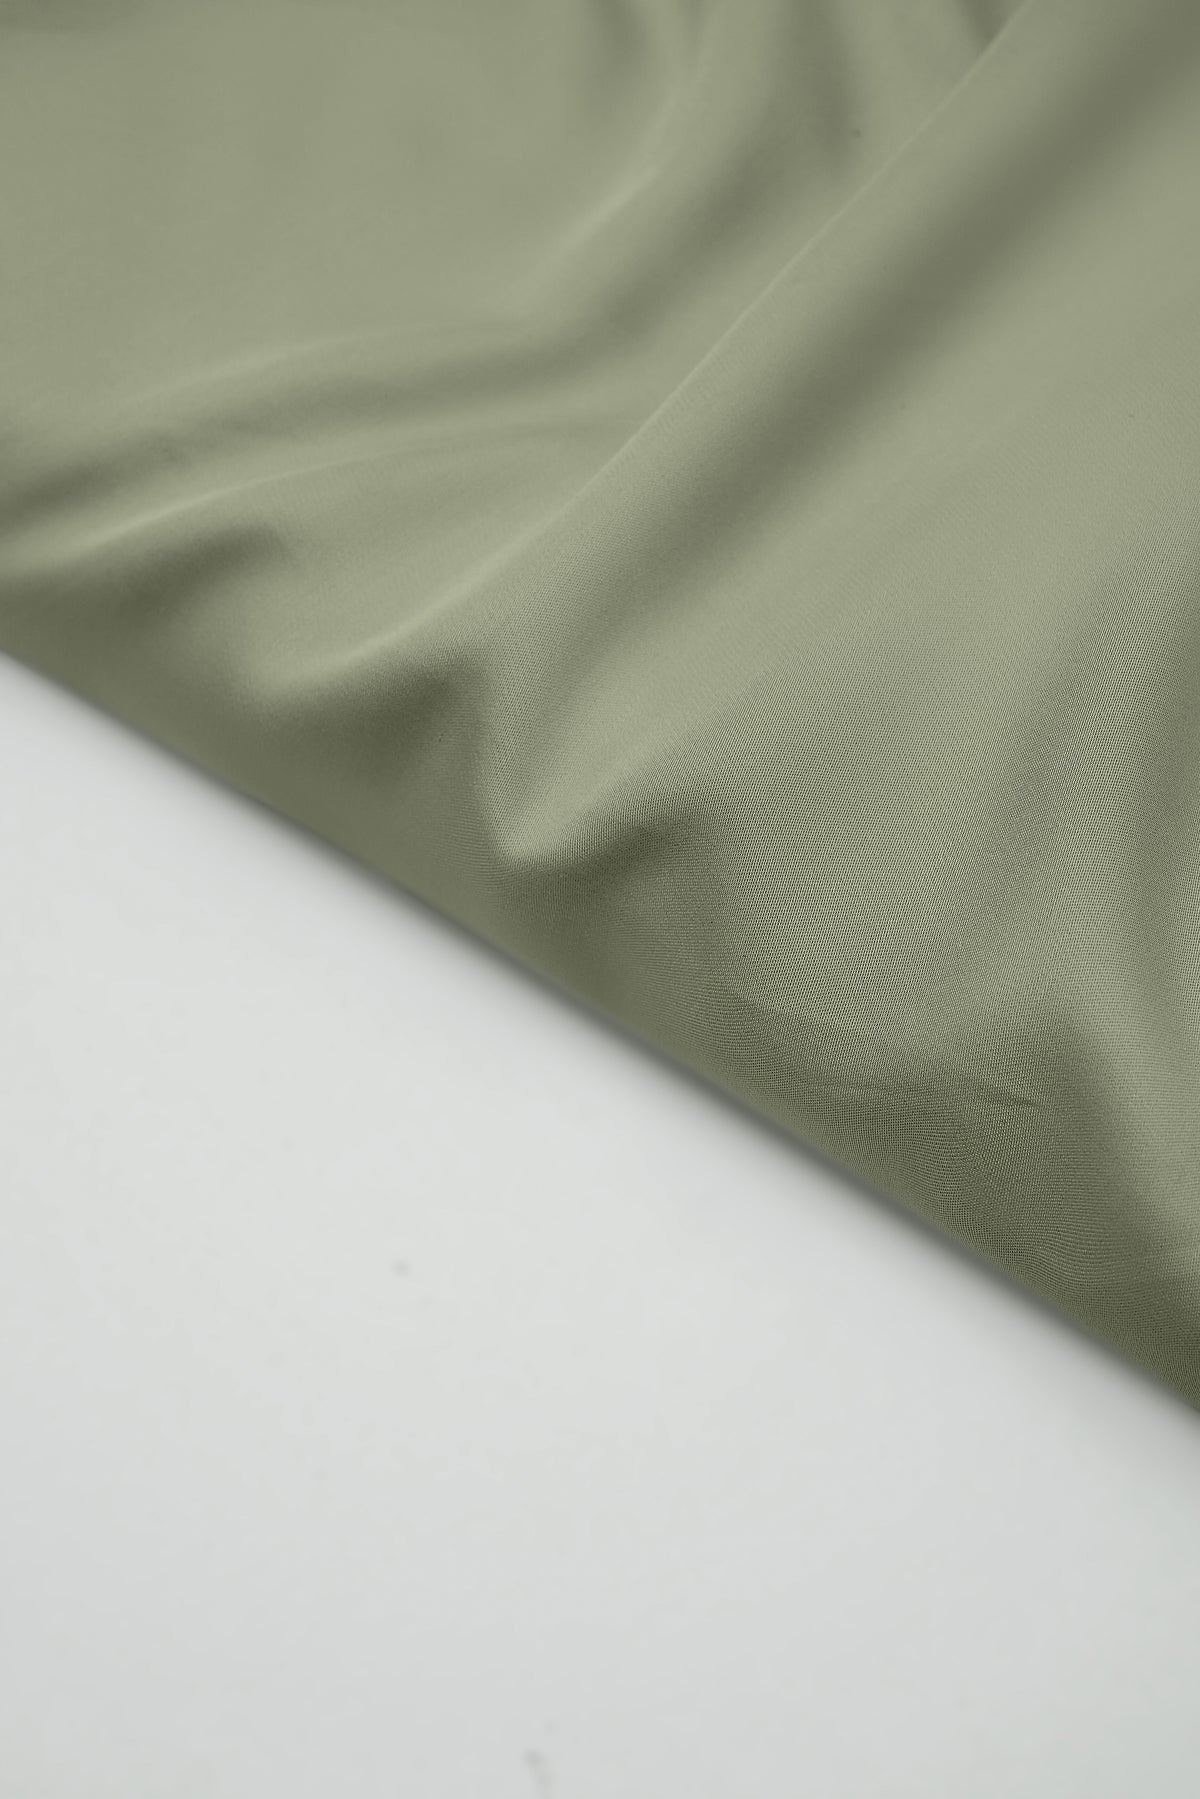 Bali, Bamboo Duvet Cover in Sage